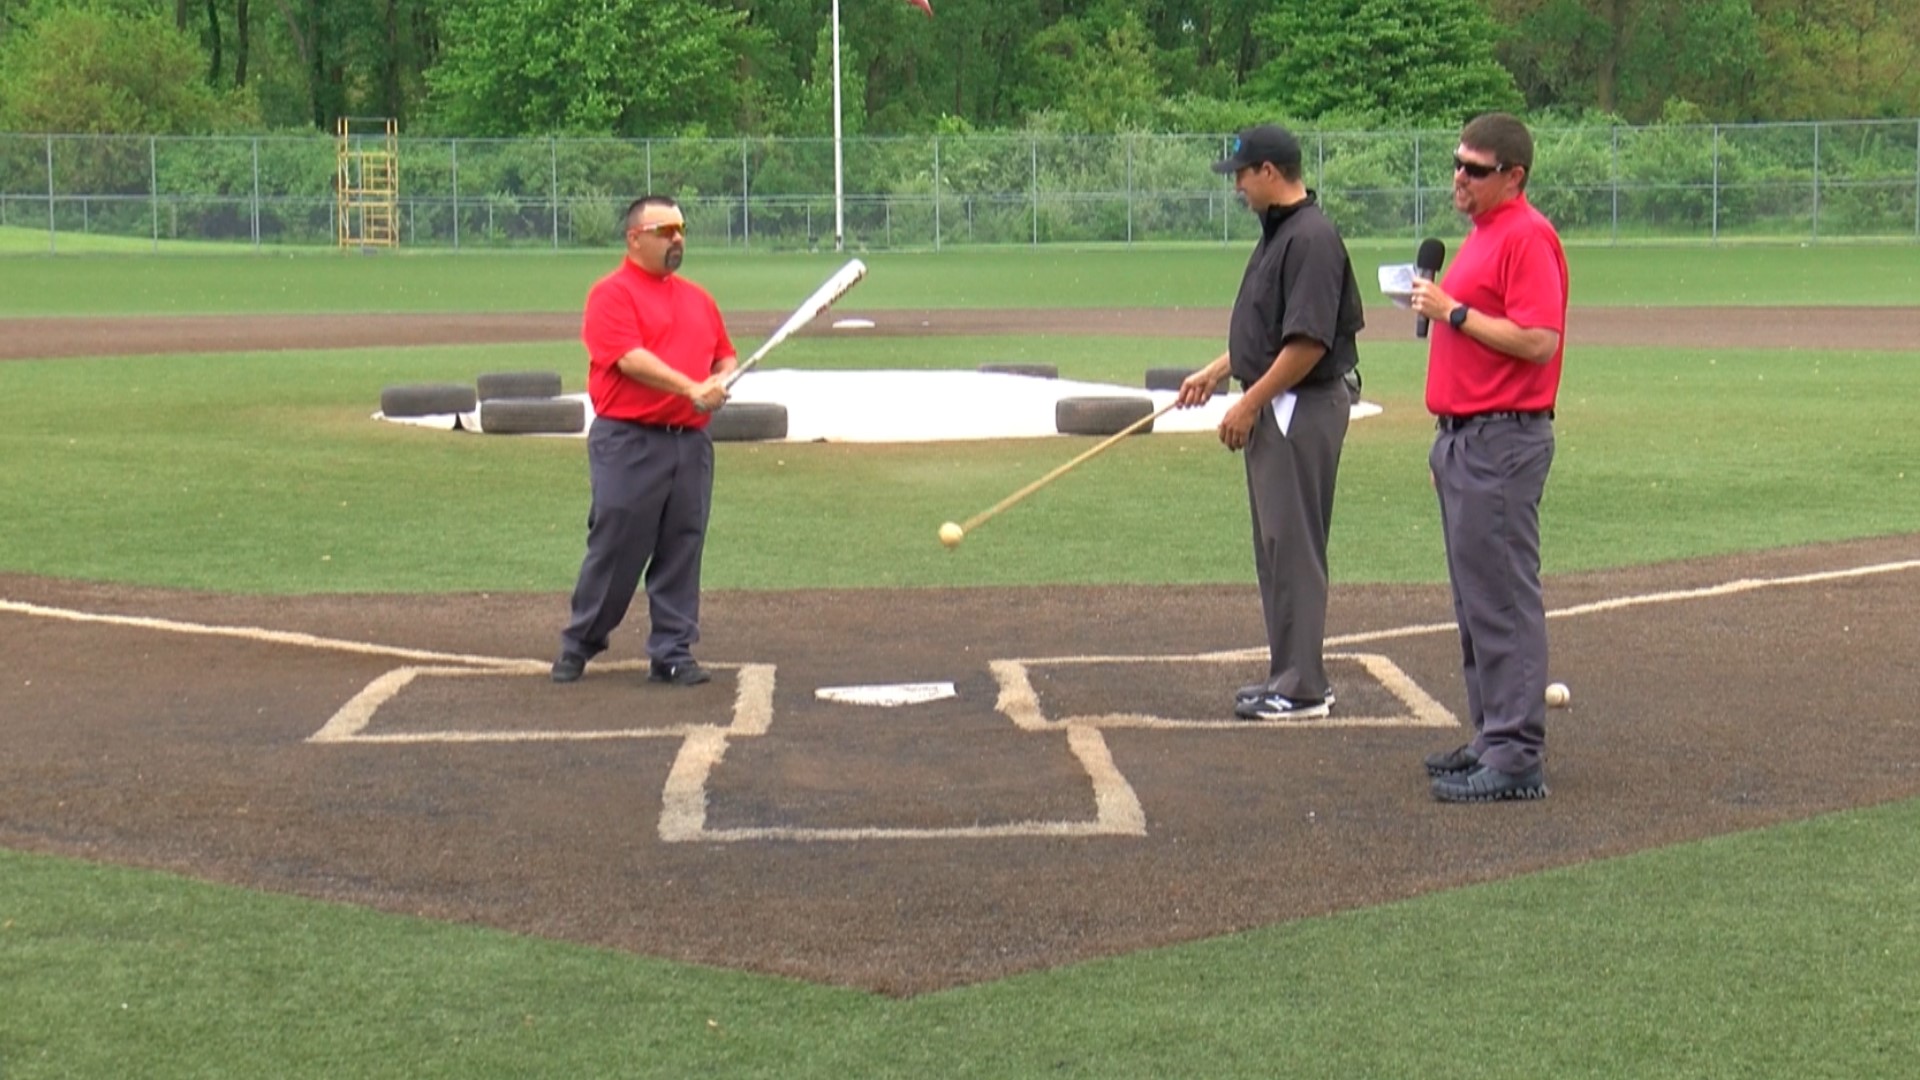 The free clinic was held to anyone wanting to or interested in being an umpire and for those simply wanting to learn more about the game of baseball.